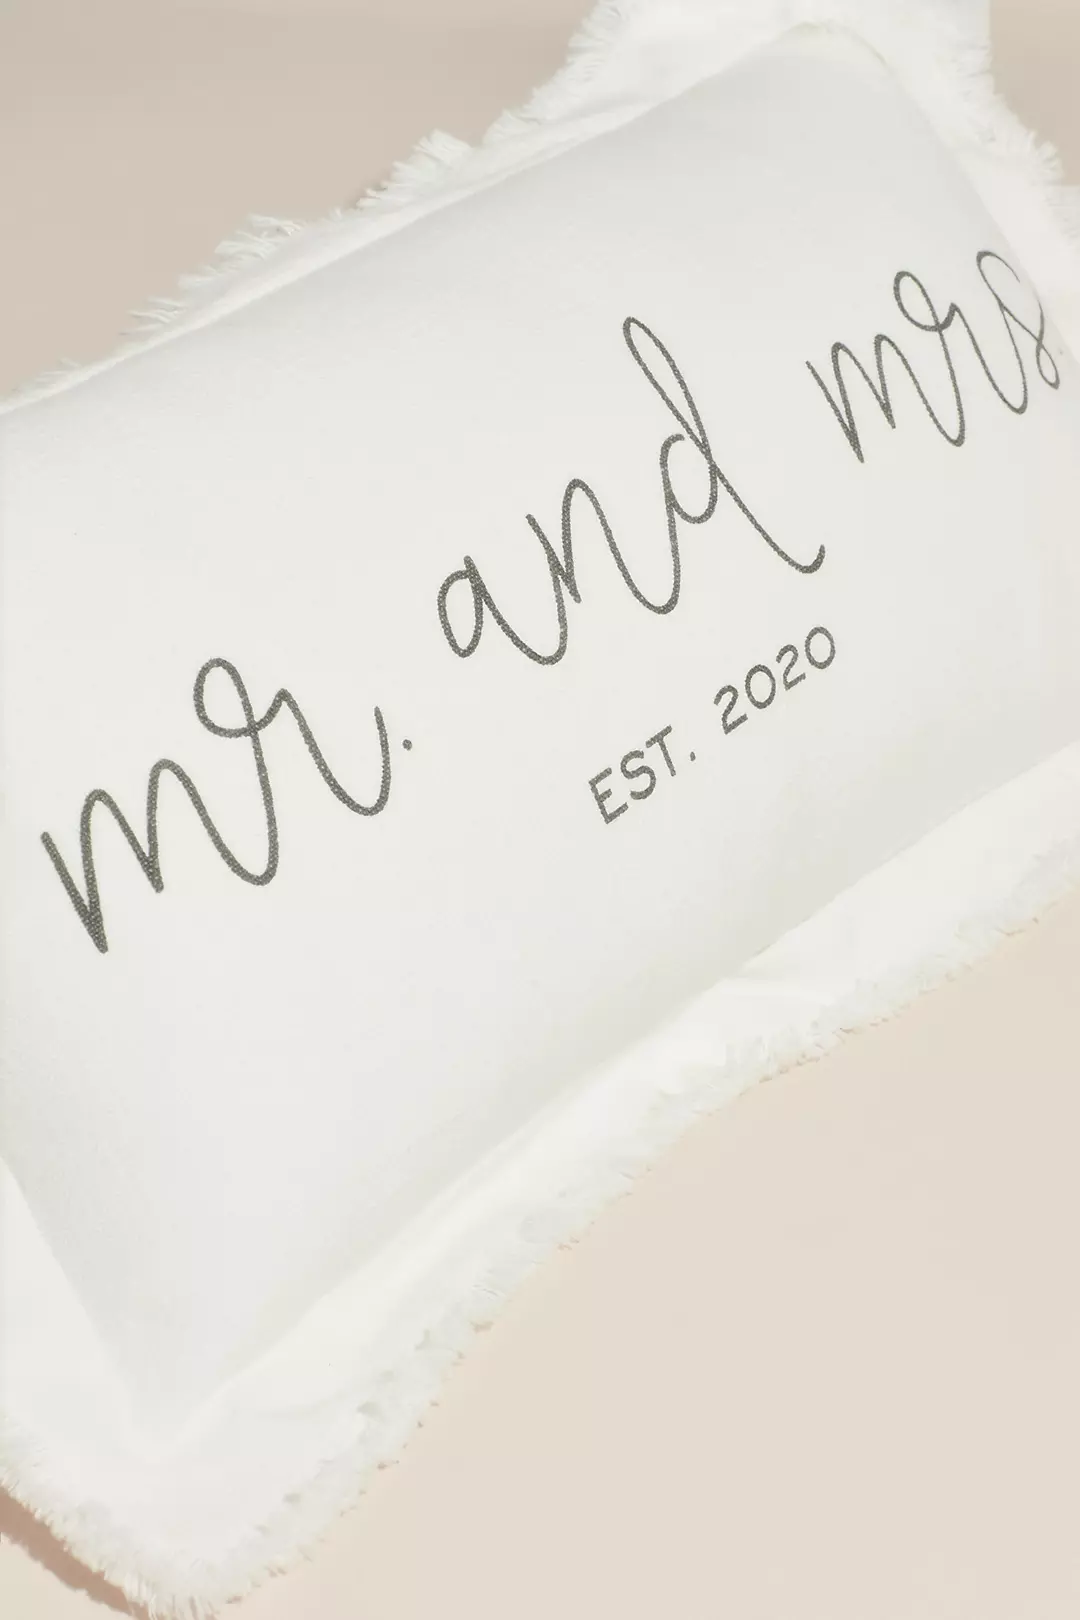 Mr and Mrs Established in 2020 Linen Throw Pillow Image 2